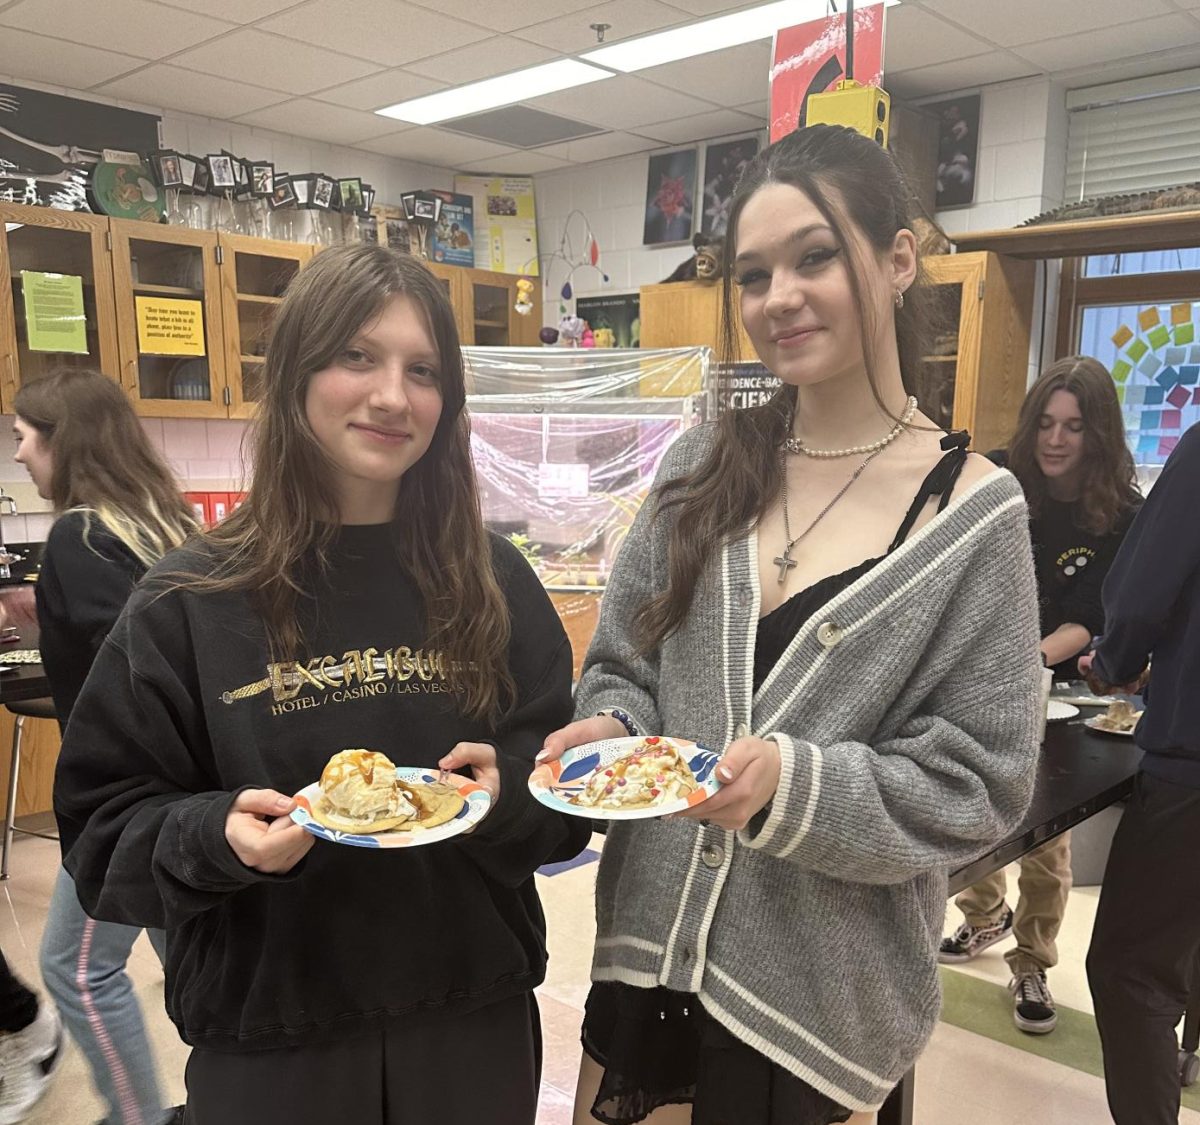 Seniors+Madelyn+Elzen+and+Gaby+Miller+help+students+bake+cookies+to+create+cookie+ice+cream+sundaes.+They+love+spreading+the+joy+of+baking+to+others+and+expressing+creativity.+